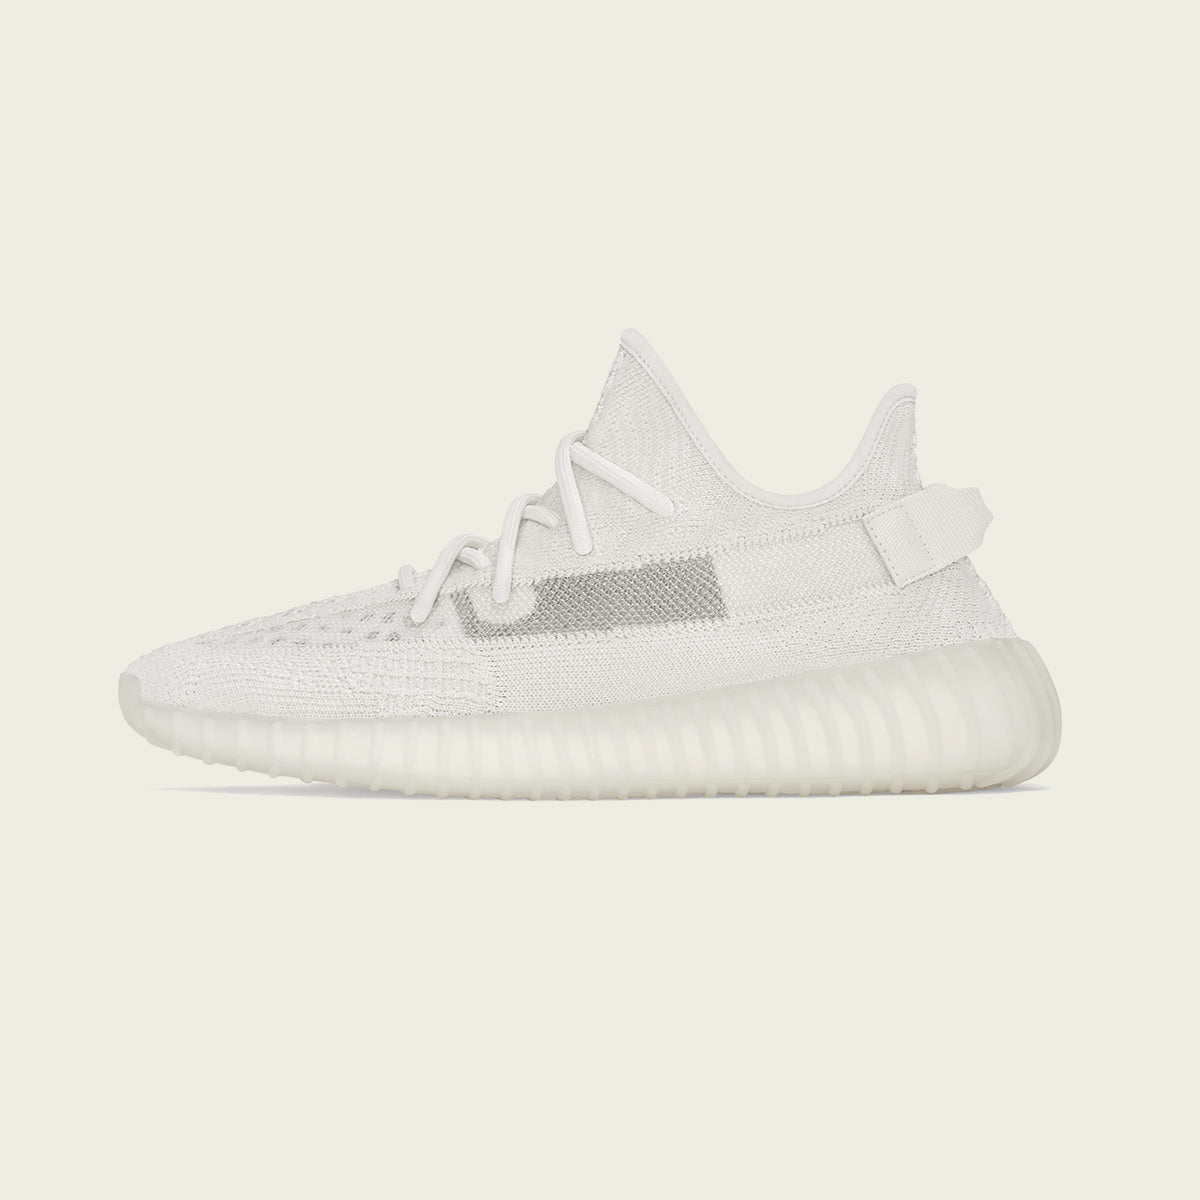 How To Customize Yeezy Boost 350 Cream White - Customs By BB 